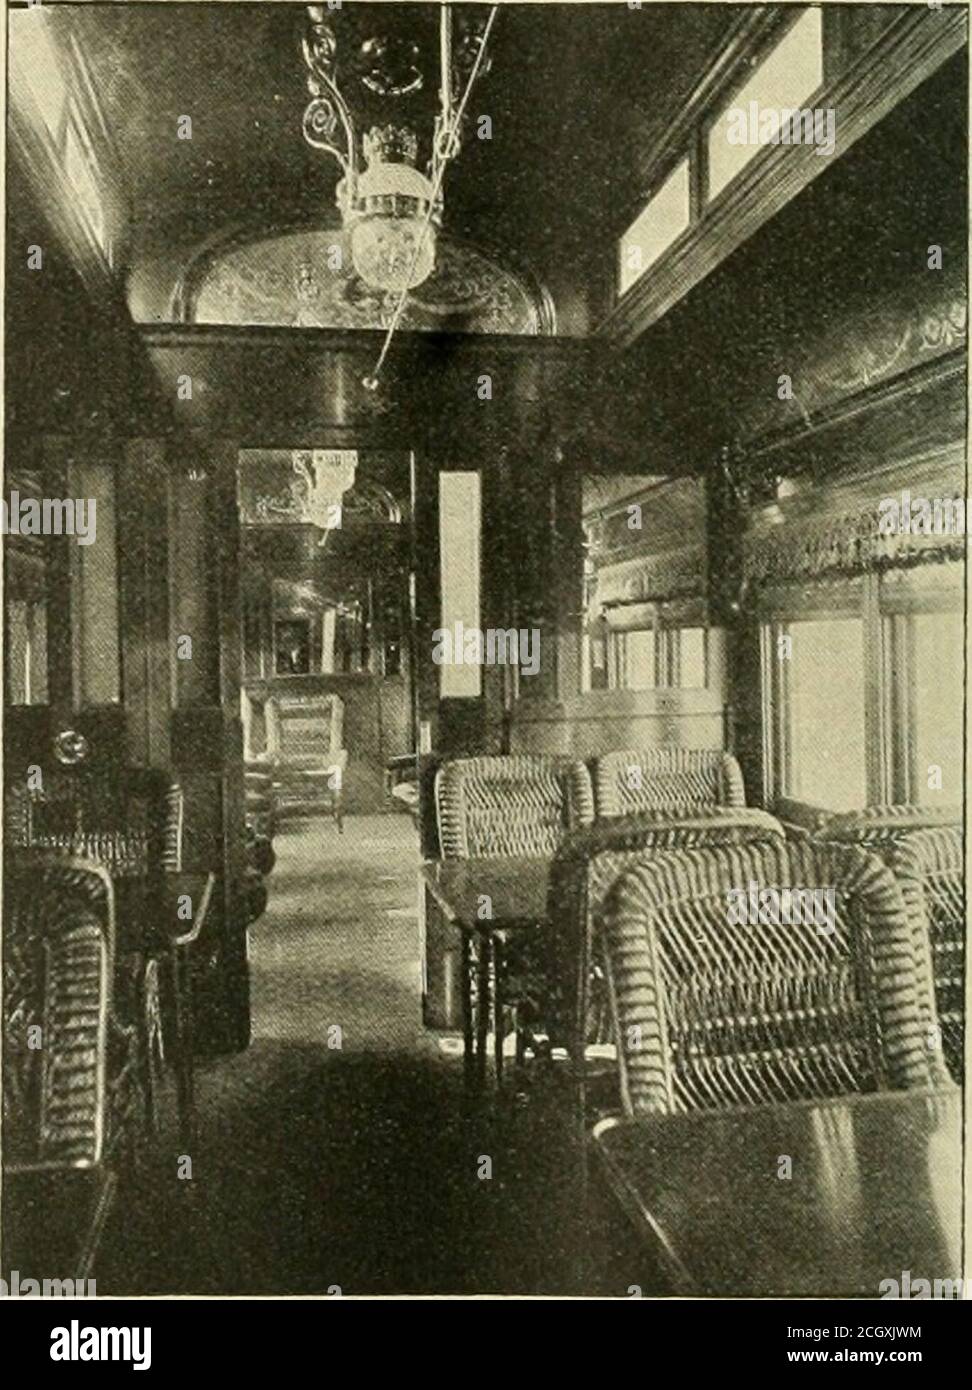 . American engineer and railroad journal . Interior of Parlor. COMBINATION CAFE, PARLOR AND BAGGAGE CARS,ILLINOIS CENTRAL RAILROAD. Tbc new train designated as tlie Daylight Special of theIUit:ois Central Railroad, now running between Chicago andSt. Louis, includes an interesting car, which is a combinationof dining, parlor and baggage accommodations in one car. Twoof these have recently been furnished by the Pullman PalaceCar Company, of Chicago. Thi length of the car over sills Is 72 feet 6 Inches Interior of Cafe Room. and the width over the sills is 9 feet 8 inches. The to-tal UUgtli is 77 Stock Photo